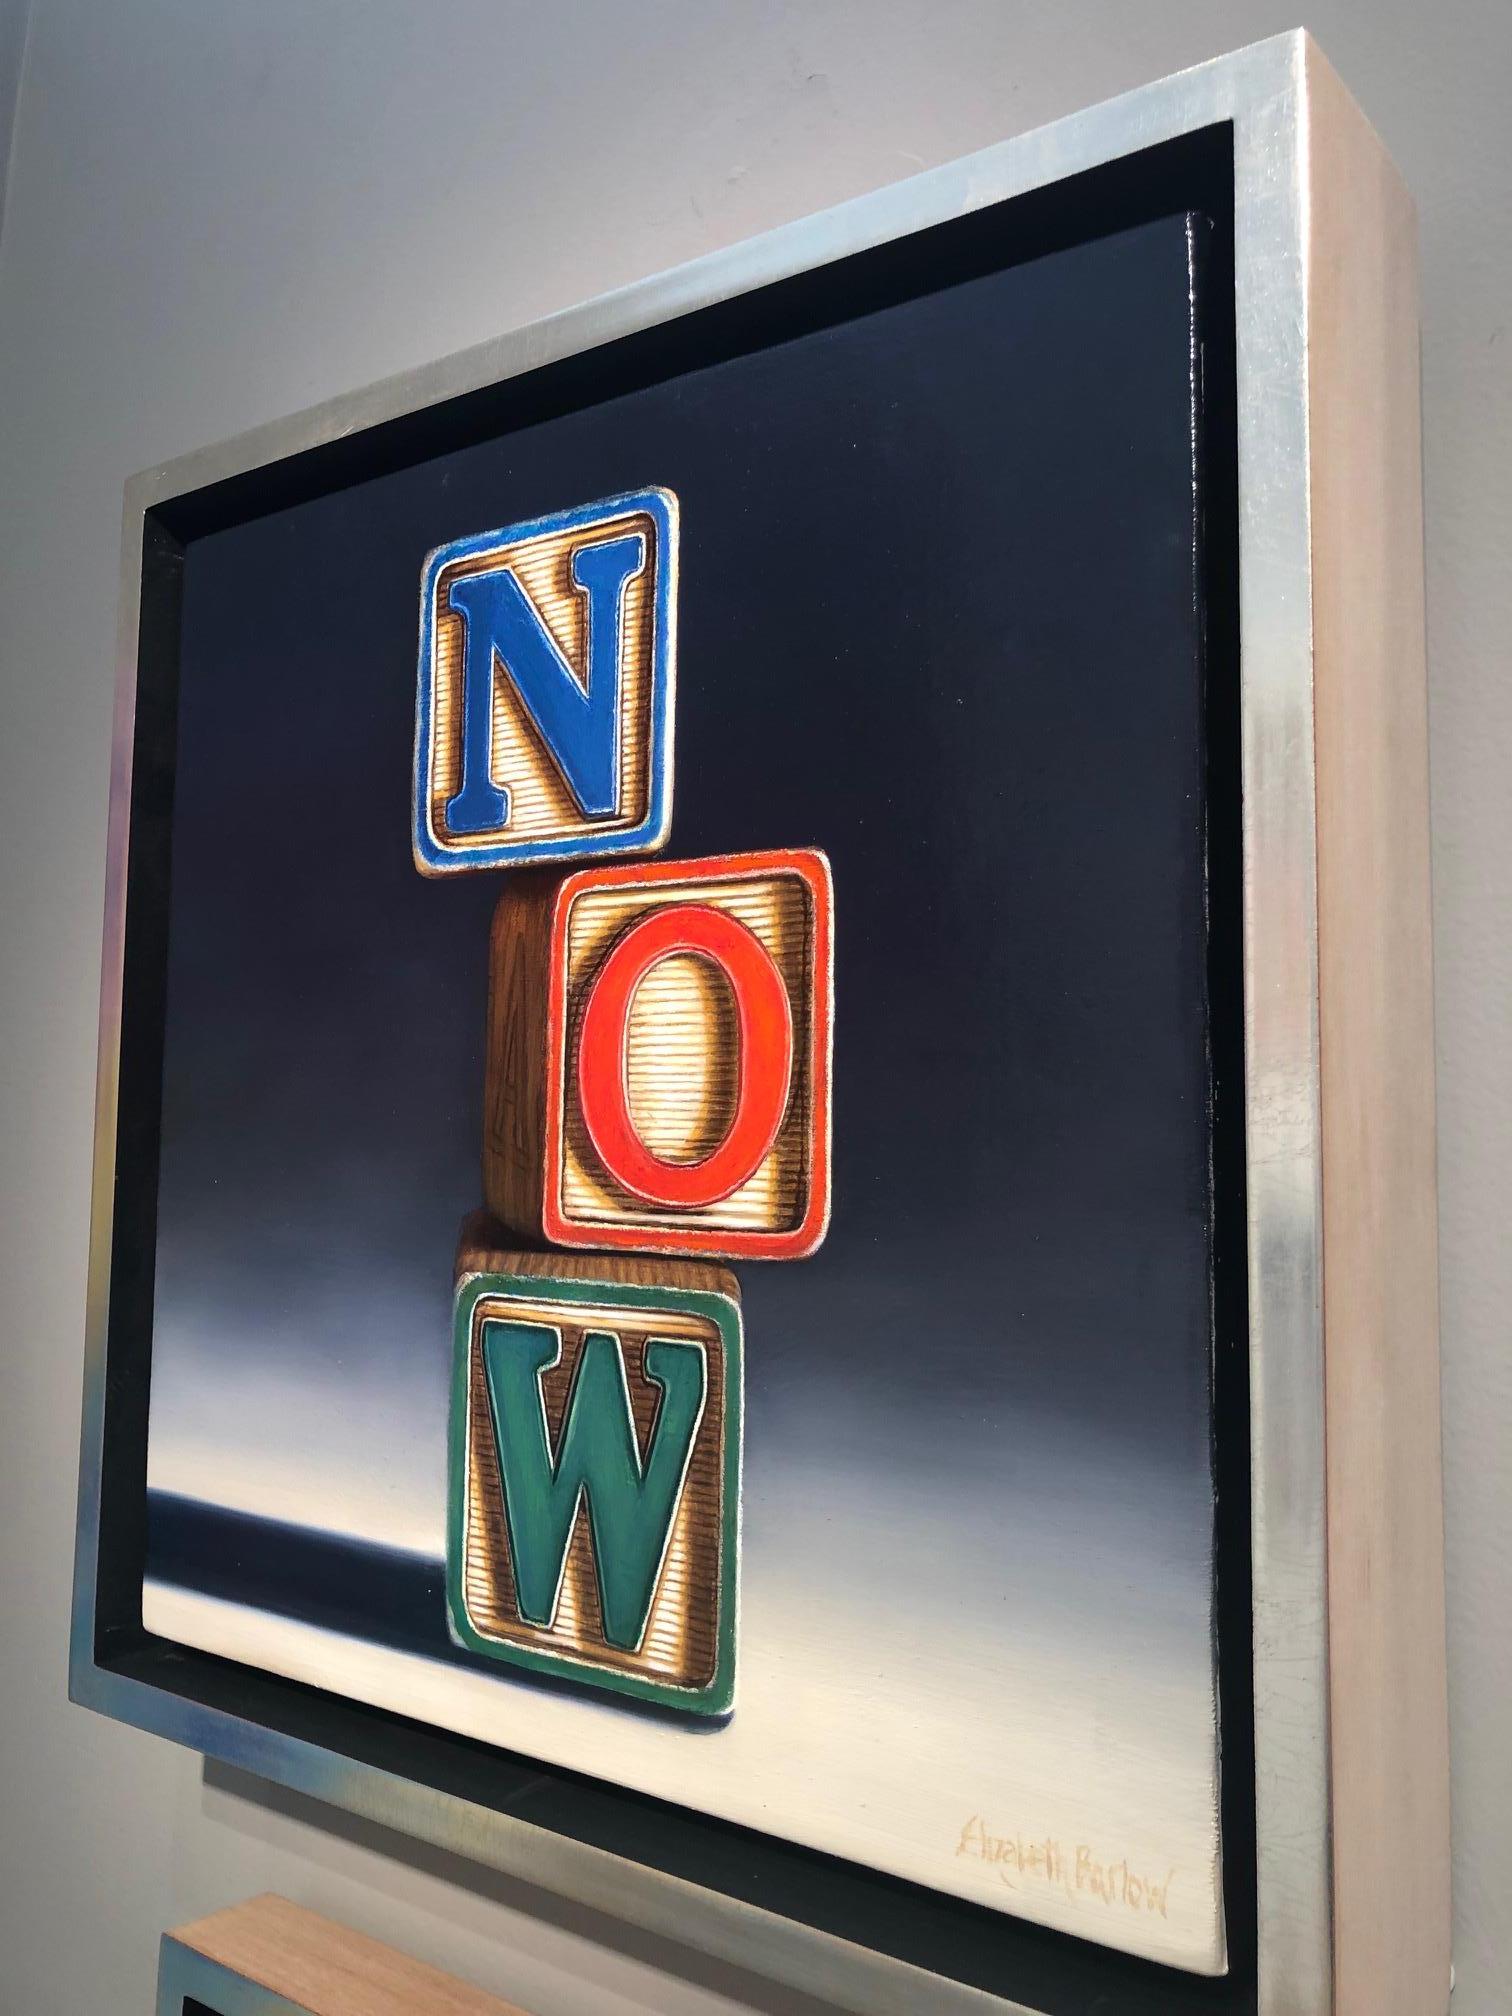 Stunning in its simplicity and vibrancy, 'NOW' is a contemporary still life oil painting by Elizabeth Barlow, who meticulously creates oil portraits and still life compositions that feature objects, rather than a face, to represent the essence of